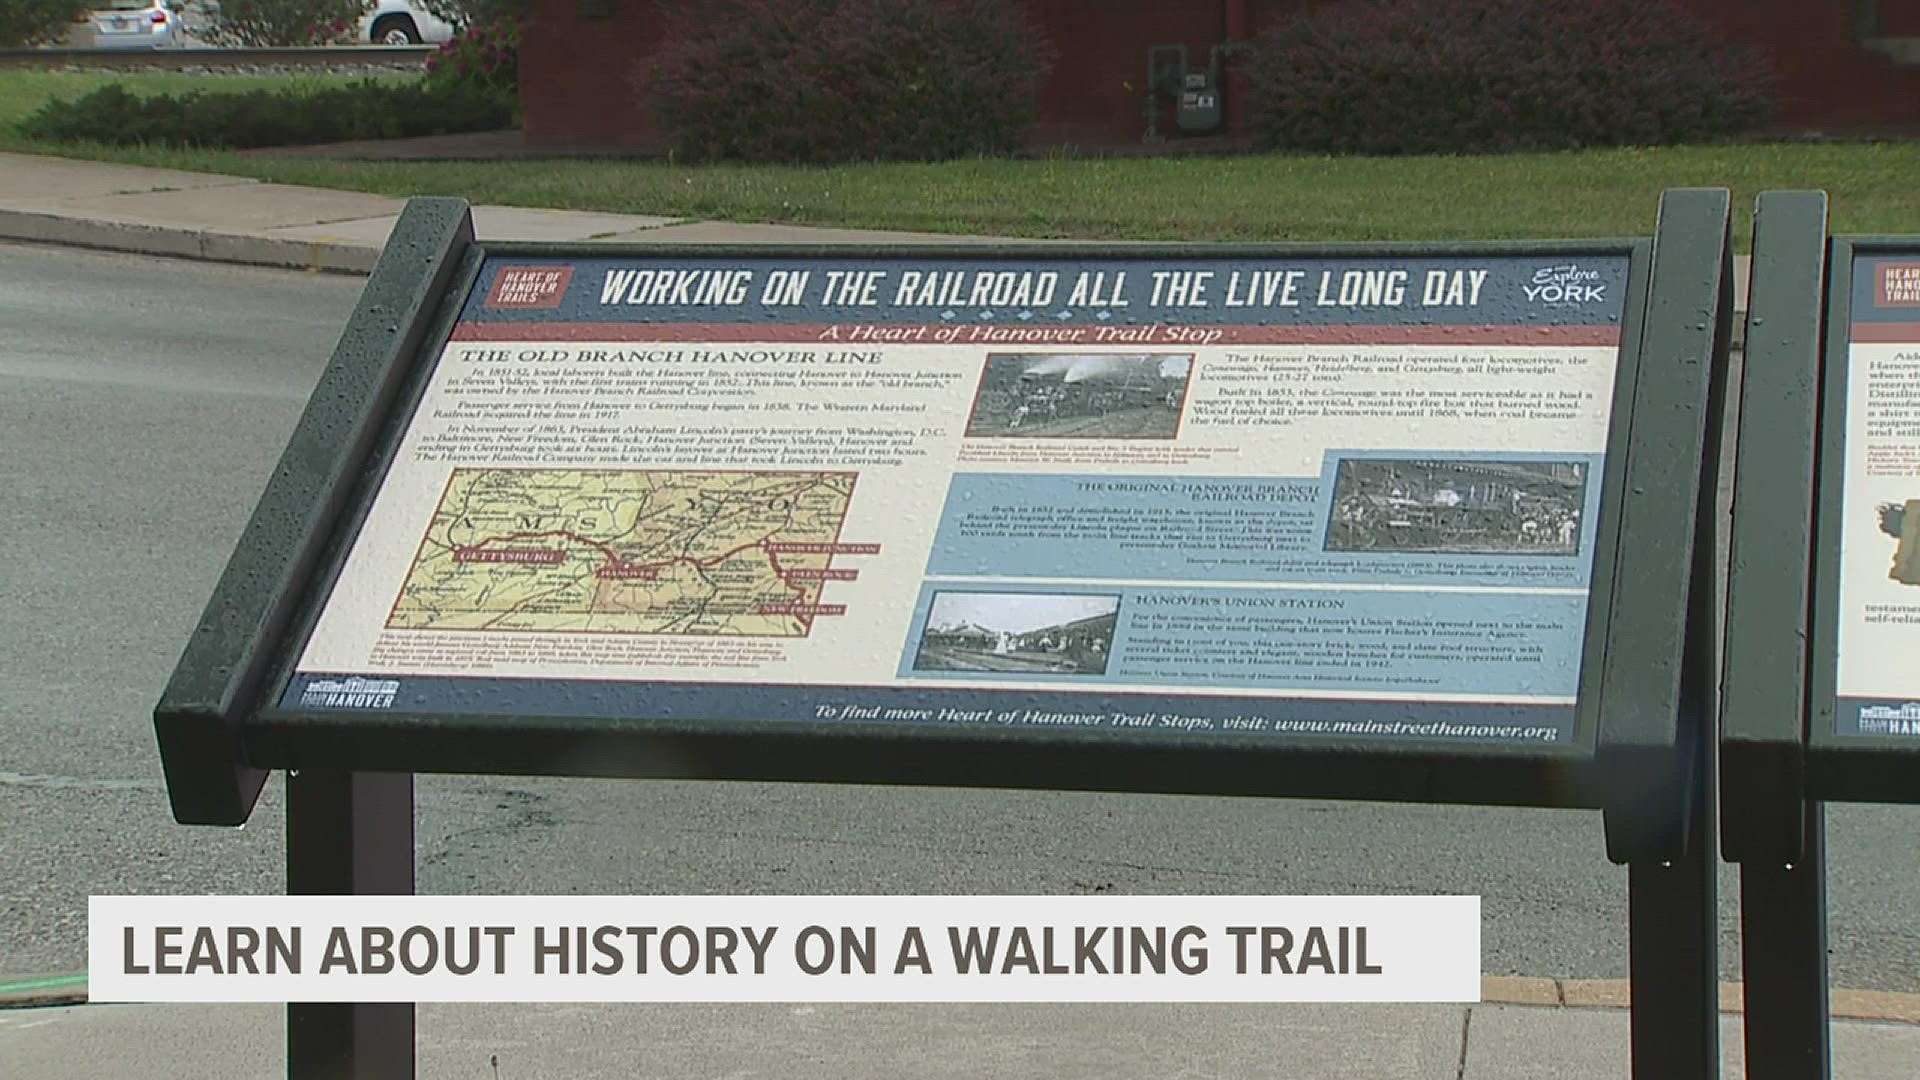 The trail captures the history of the area during the Civil War using markers along the path.